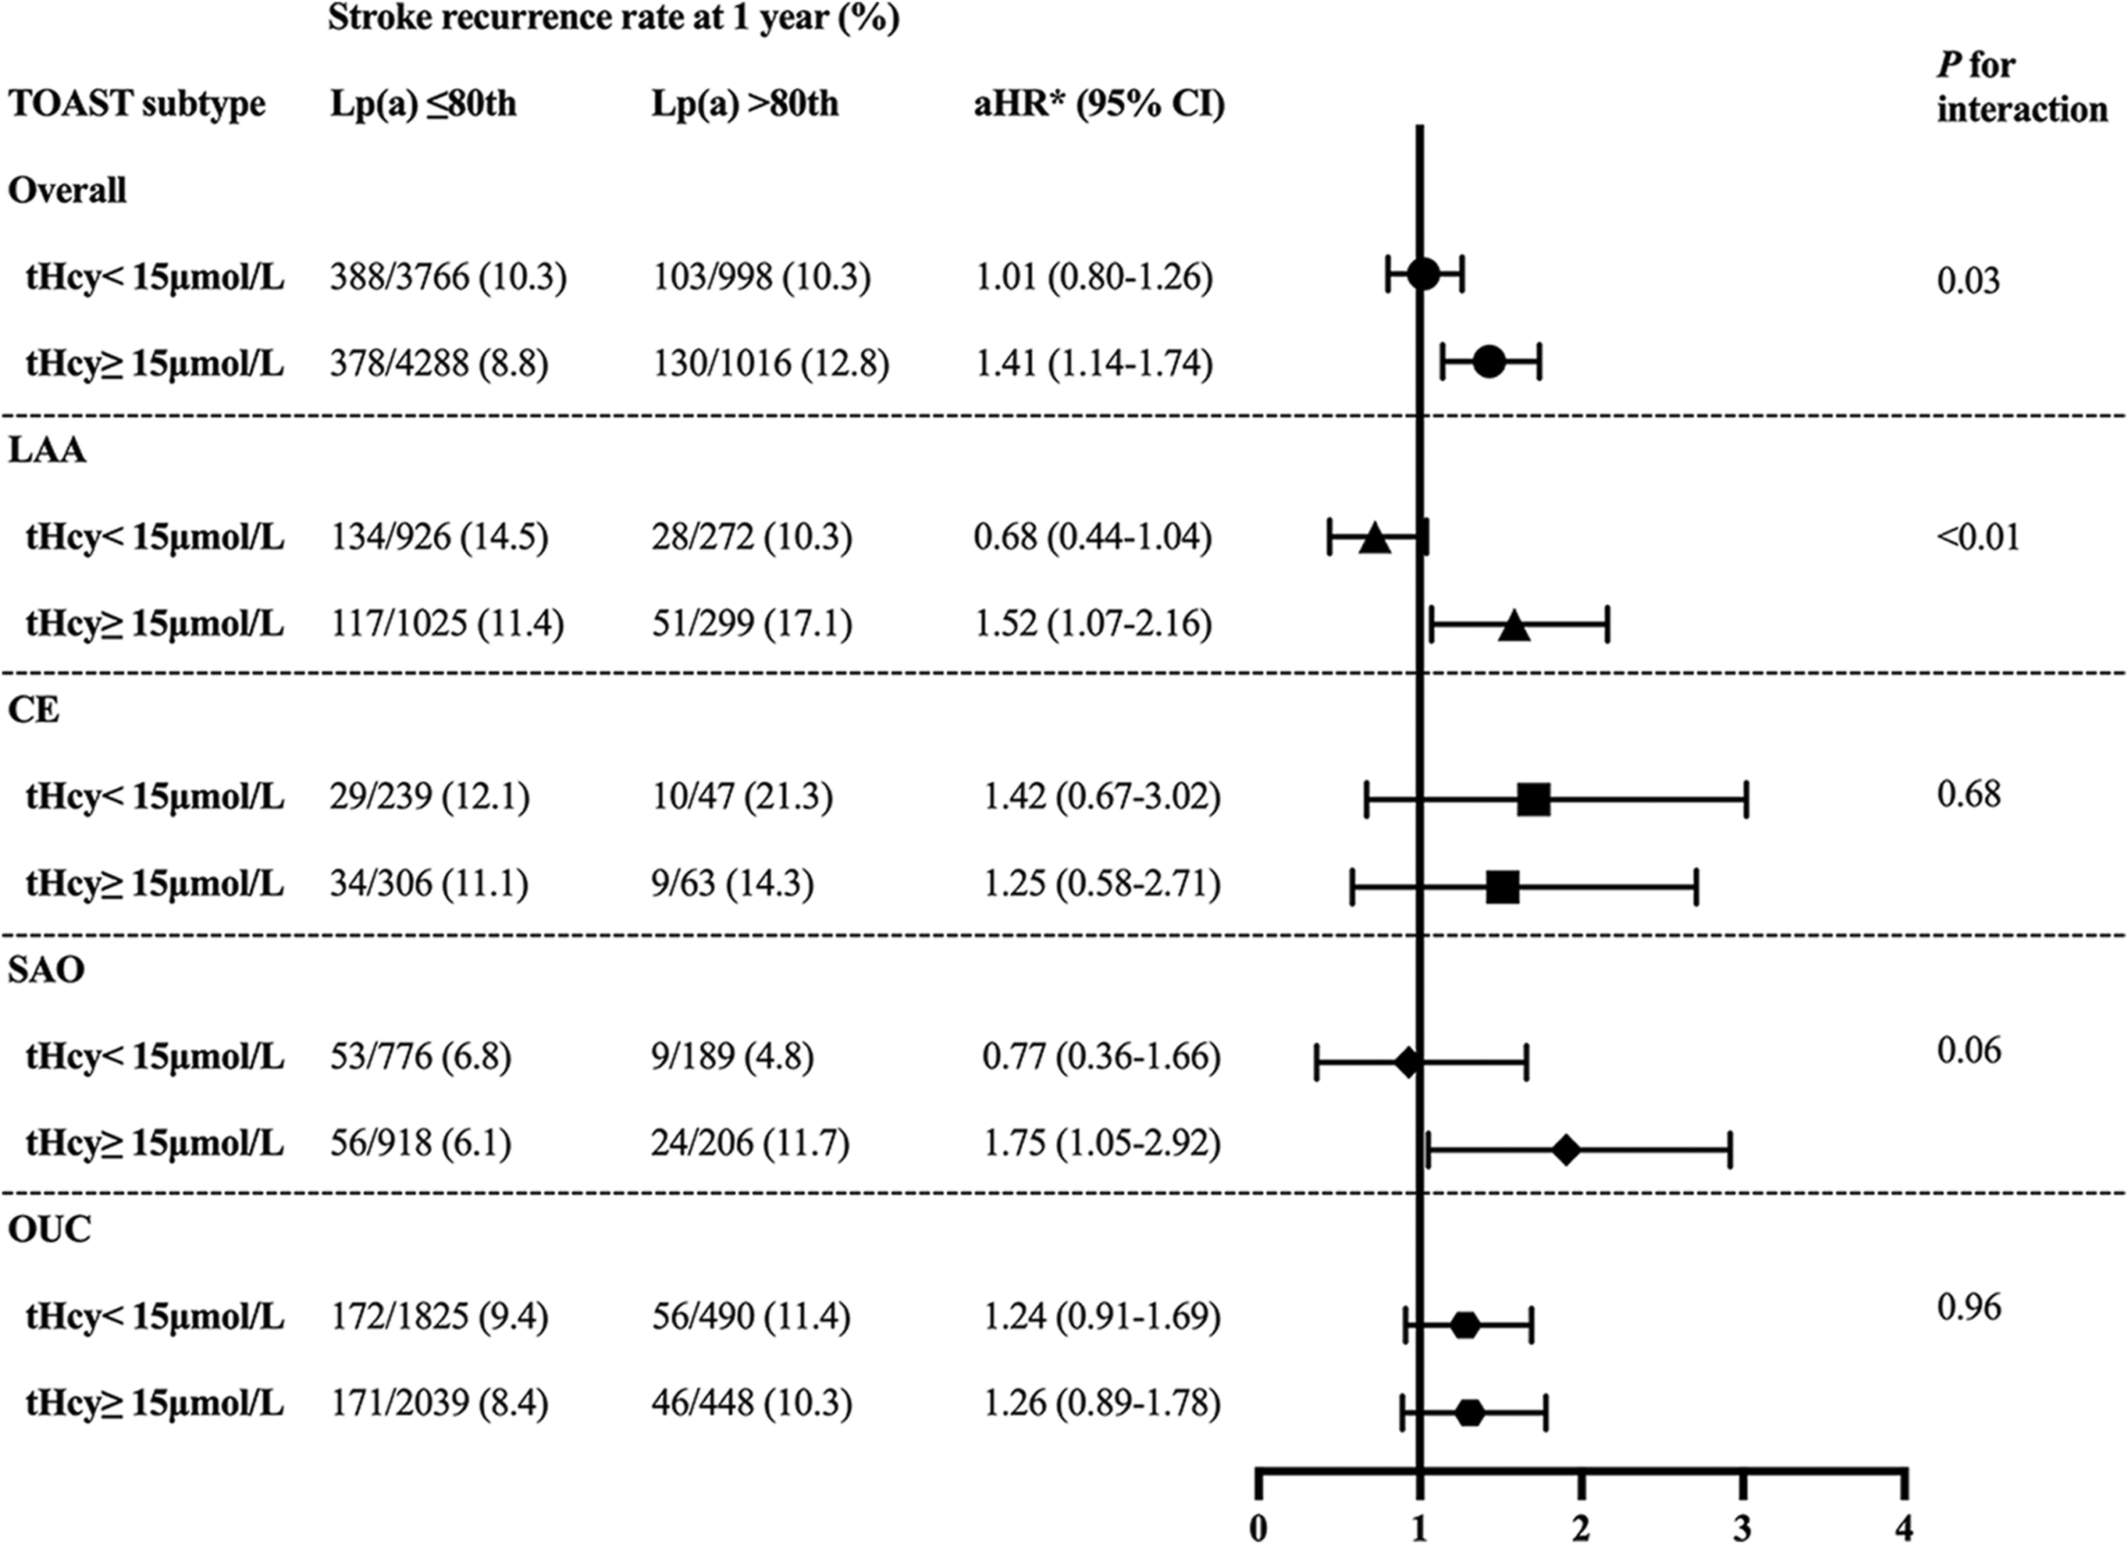 Elevated Homocysteine Intensify the Effect of Lipoprotein(a) on Stroke Recurrence